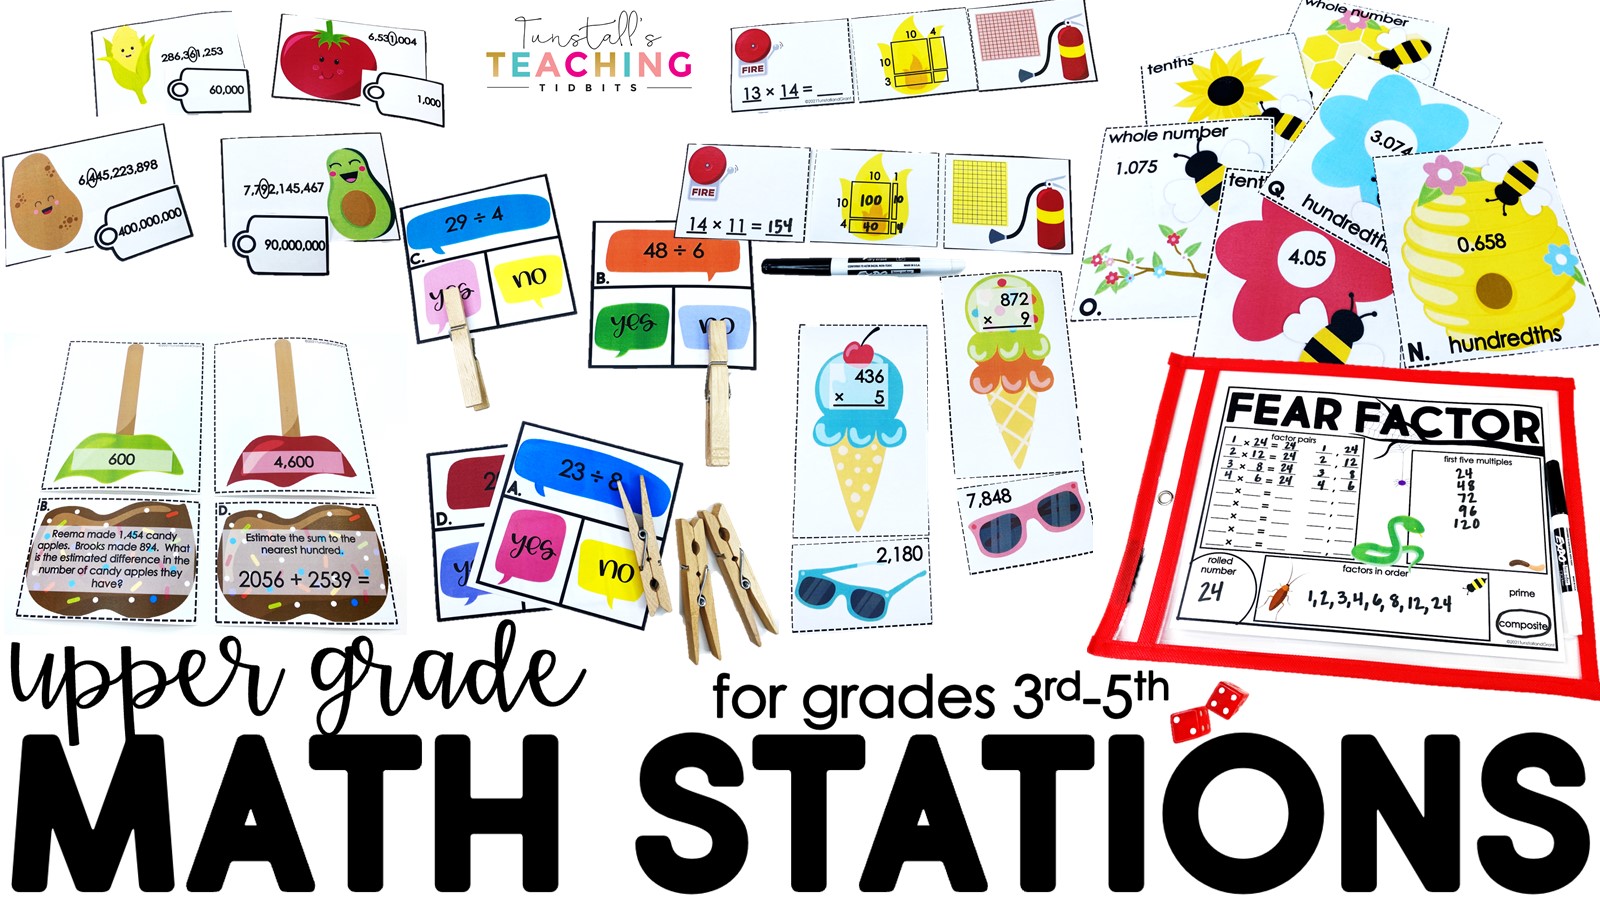 stations by standard